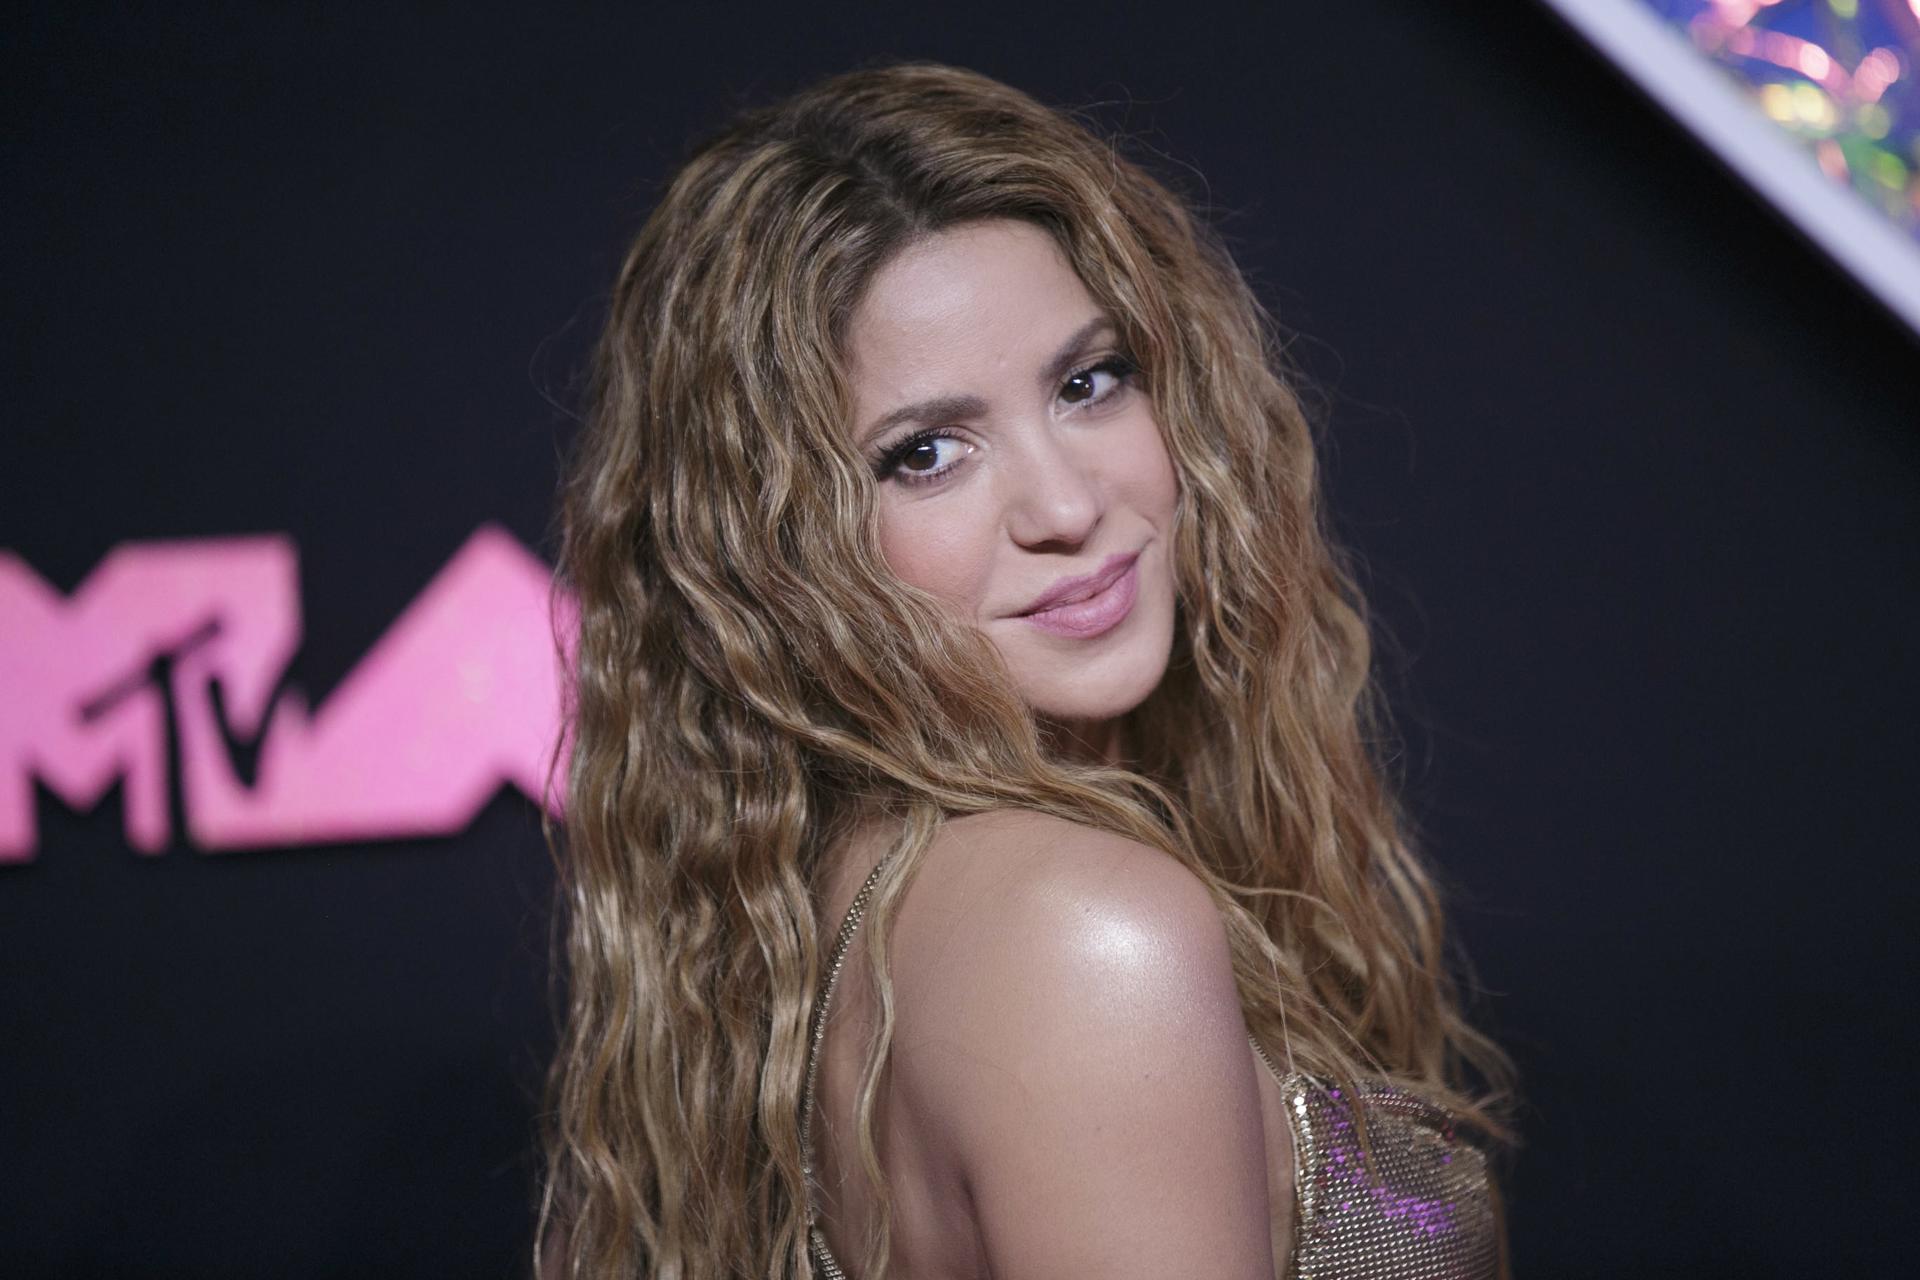 Colombian singer and songwriter Shakira poses on the red carpet during the MTV Video Music Awards at the Prudential Center in Newark, New Jersey, USA, 12 September 2023. EFE/EPA/SARAH YENESEL
